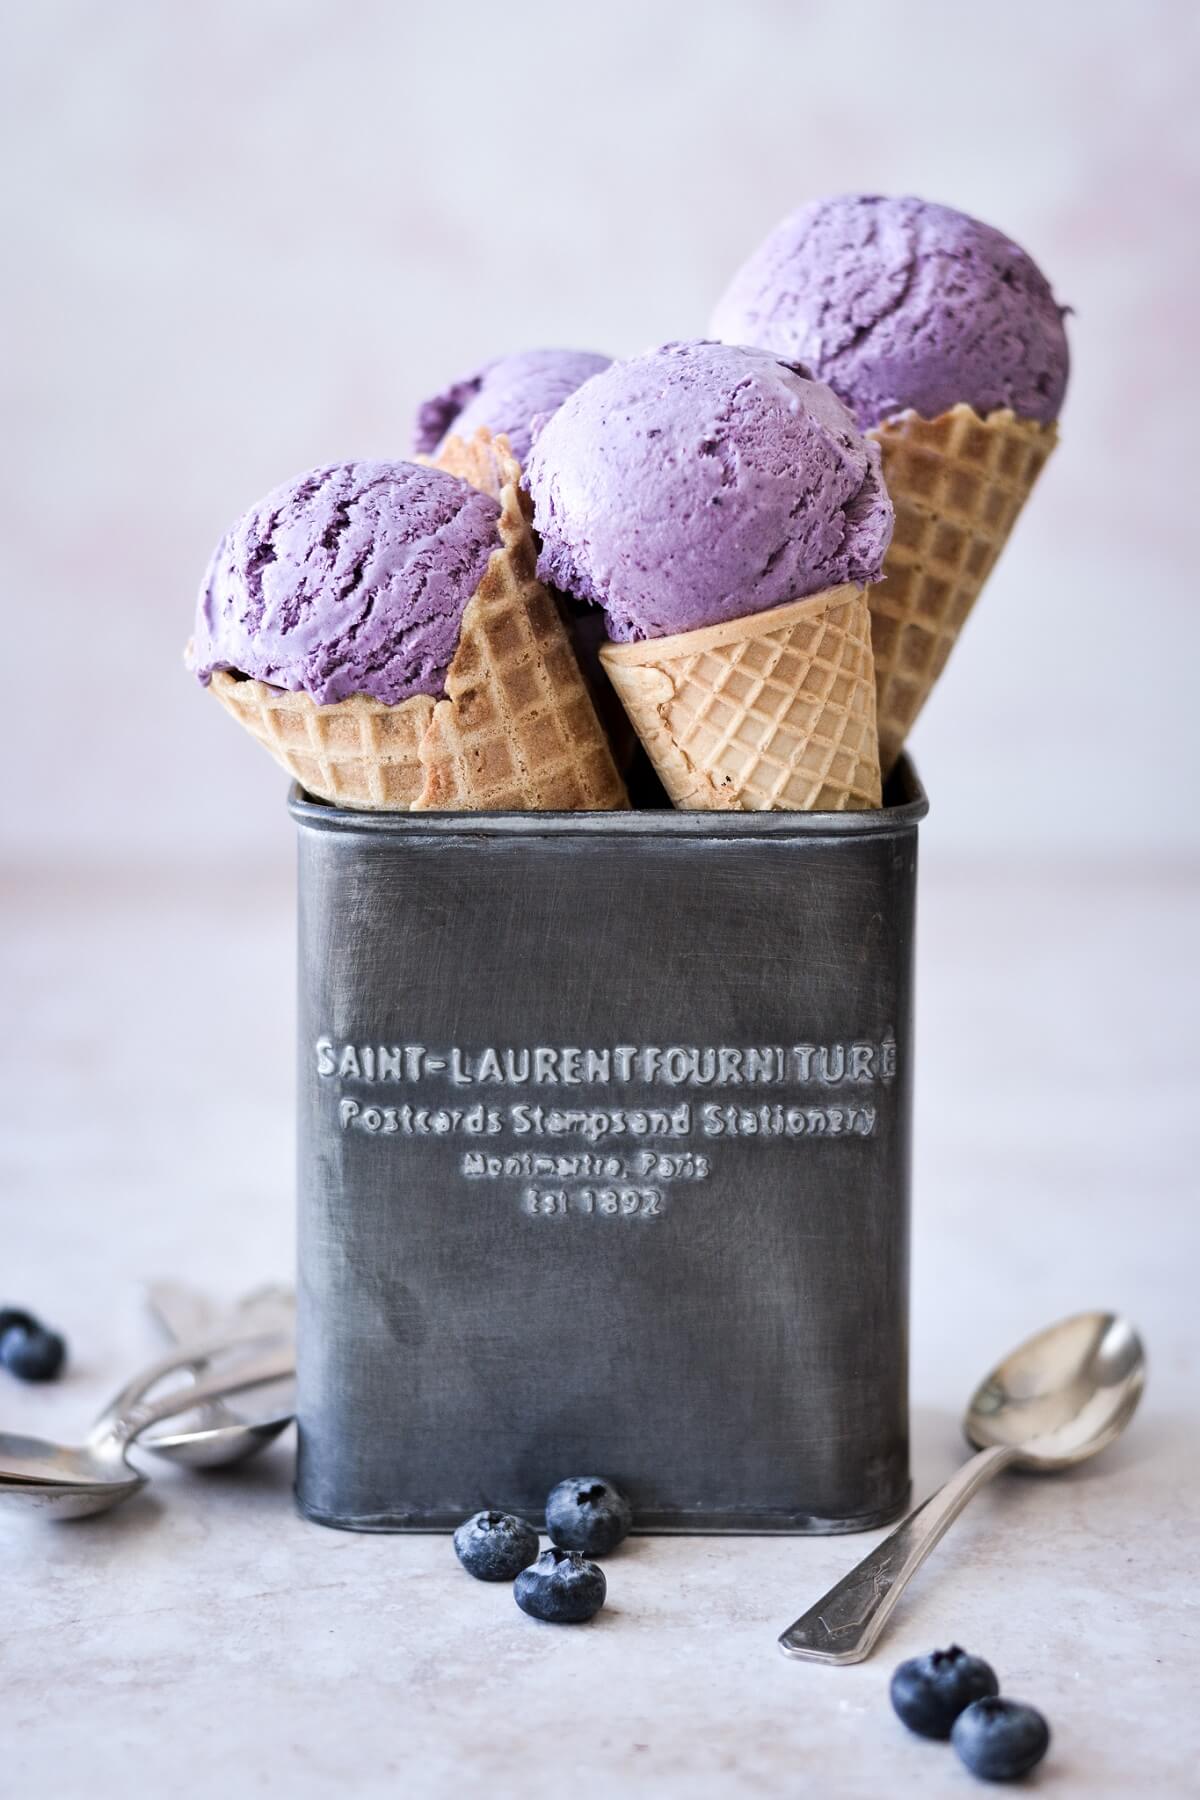 Blueberry ice cream cones in a metal box.